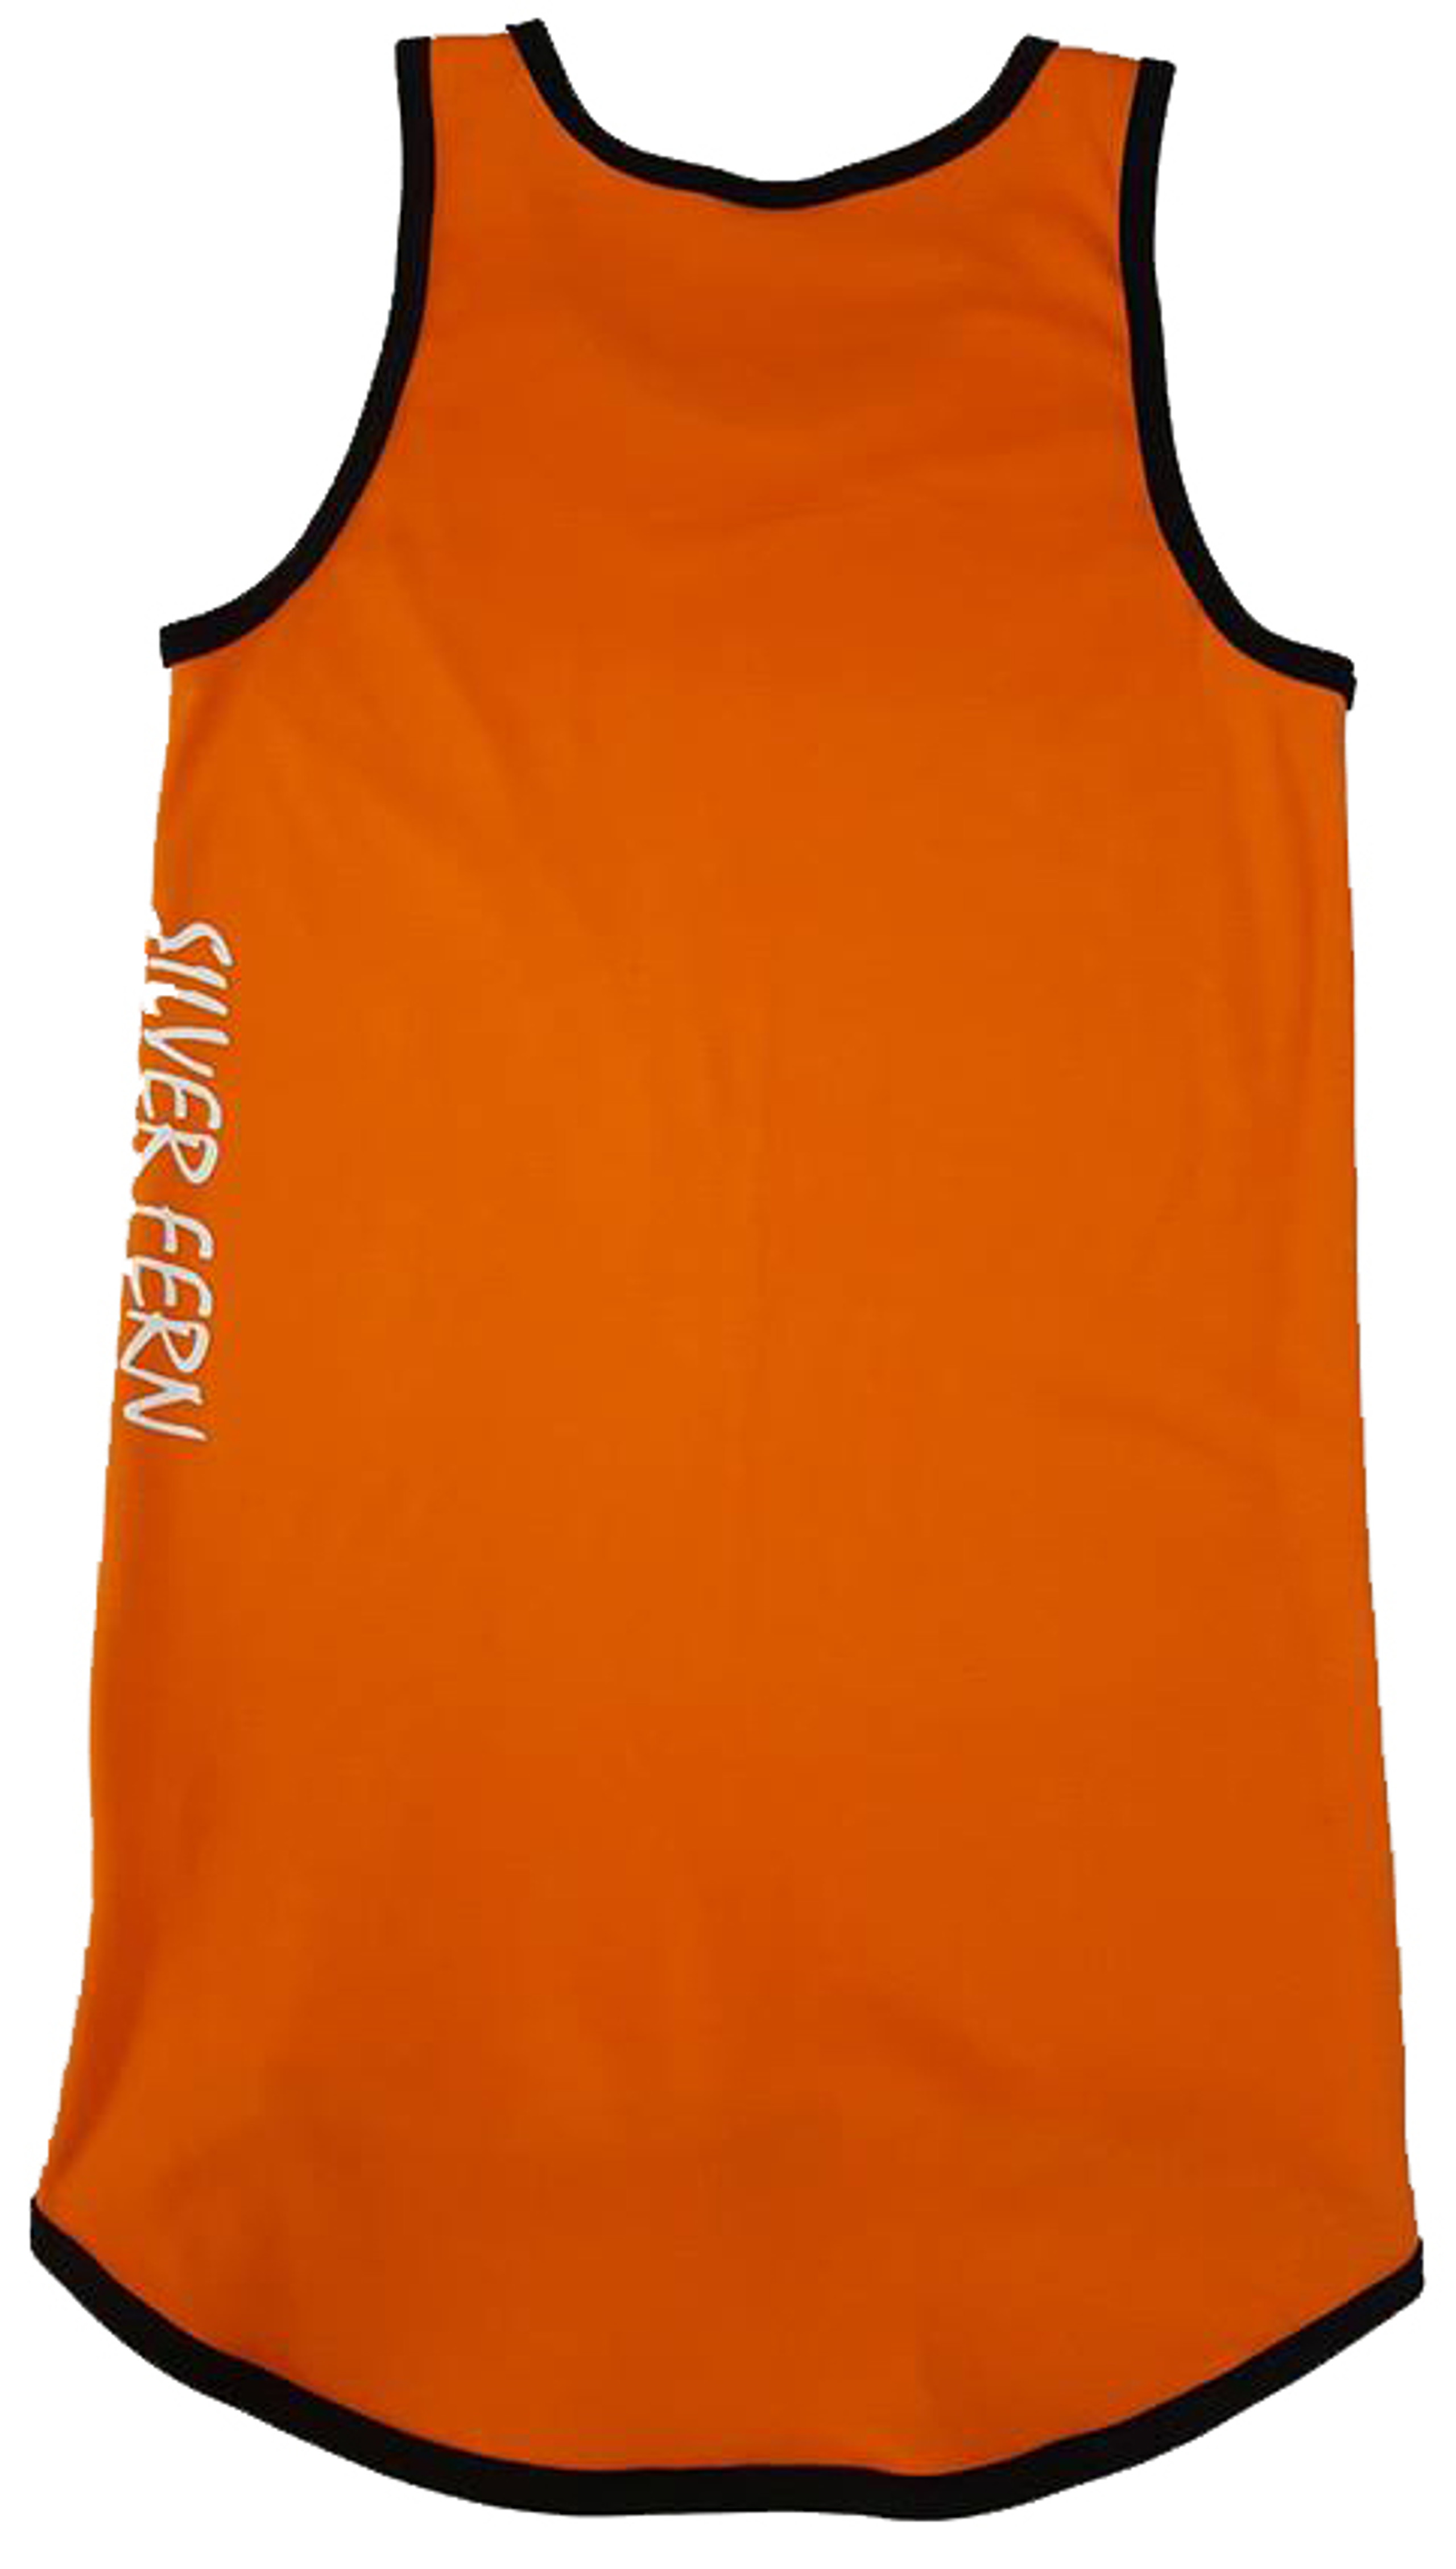 Mens Shearer’s Singlet - 100% Cotton - Squires Manufacturing Co Ltd